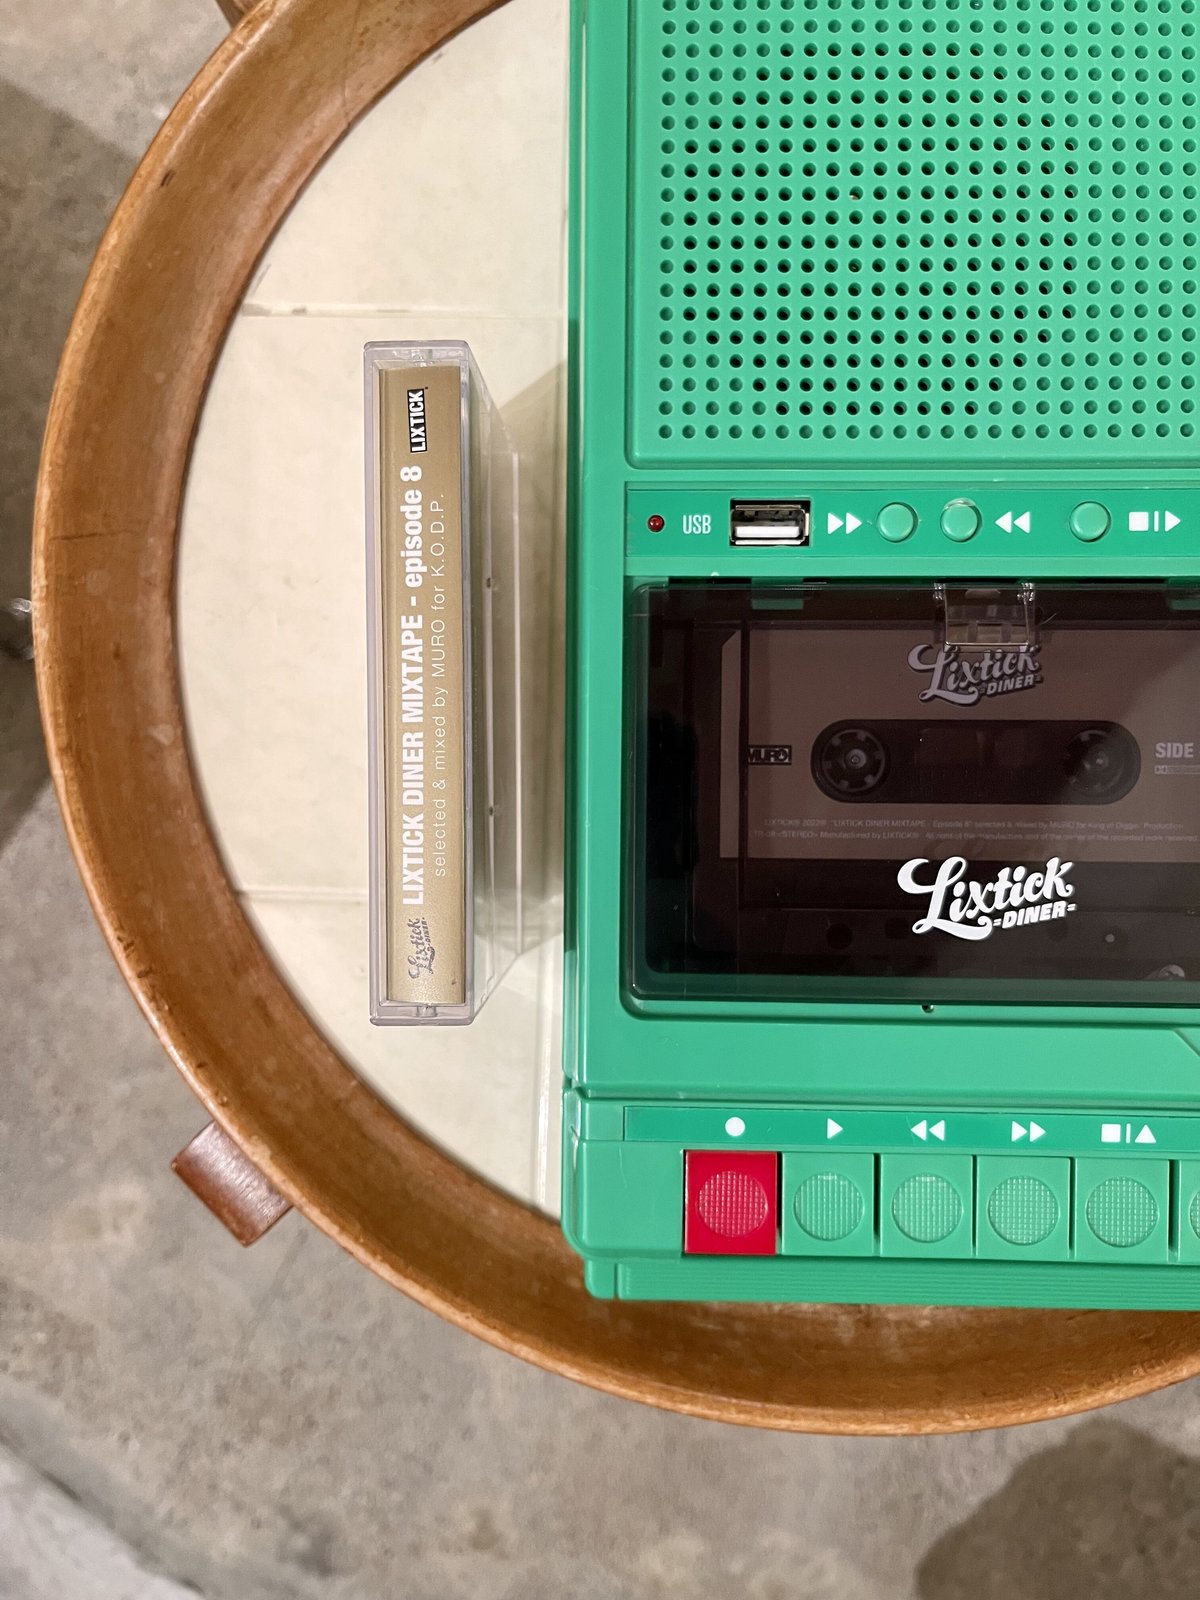 LIXTICK PORTABLE CASSETTE PLAYER - ポータブルプレーヤー